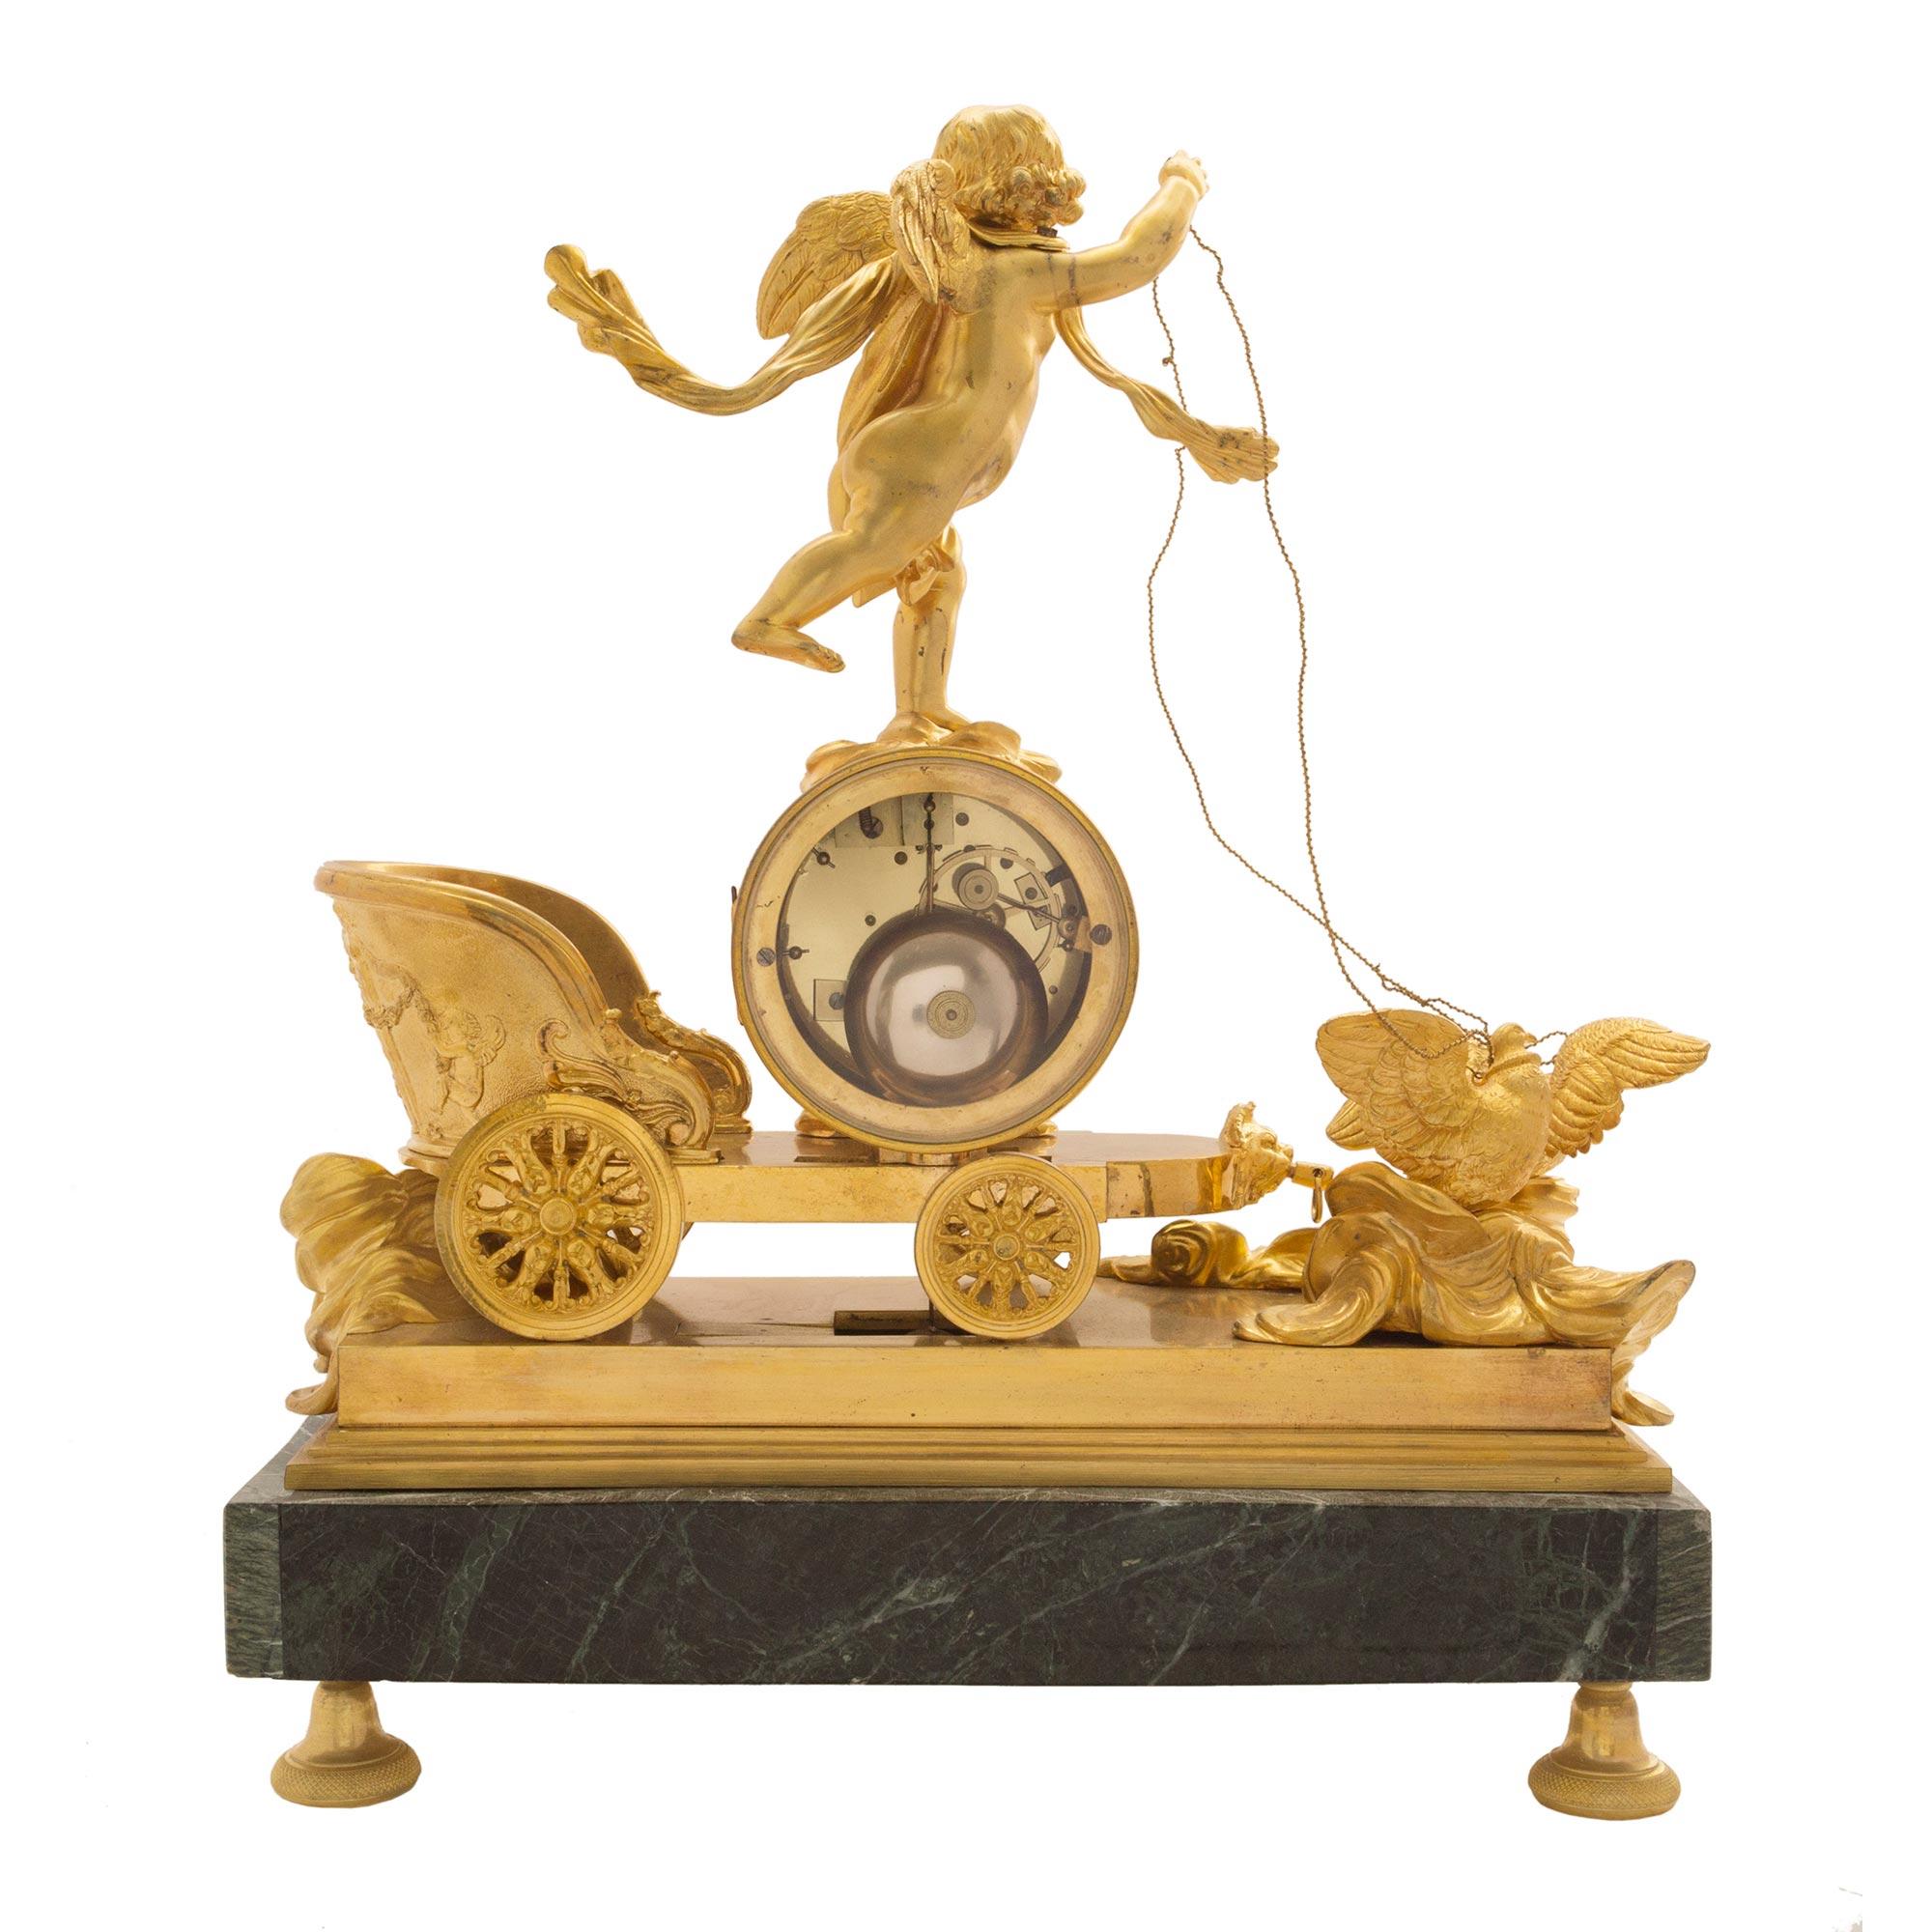 French 19th Century Neoclassical Empire Style Ormolu and Marble Clock For Sale 1